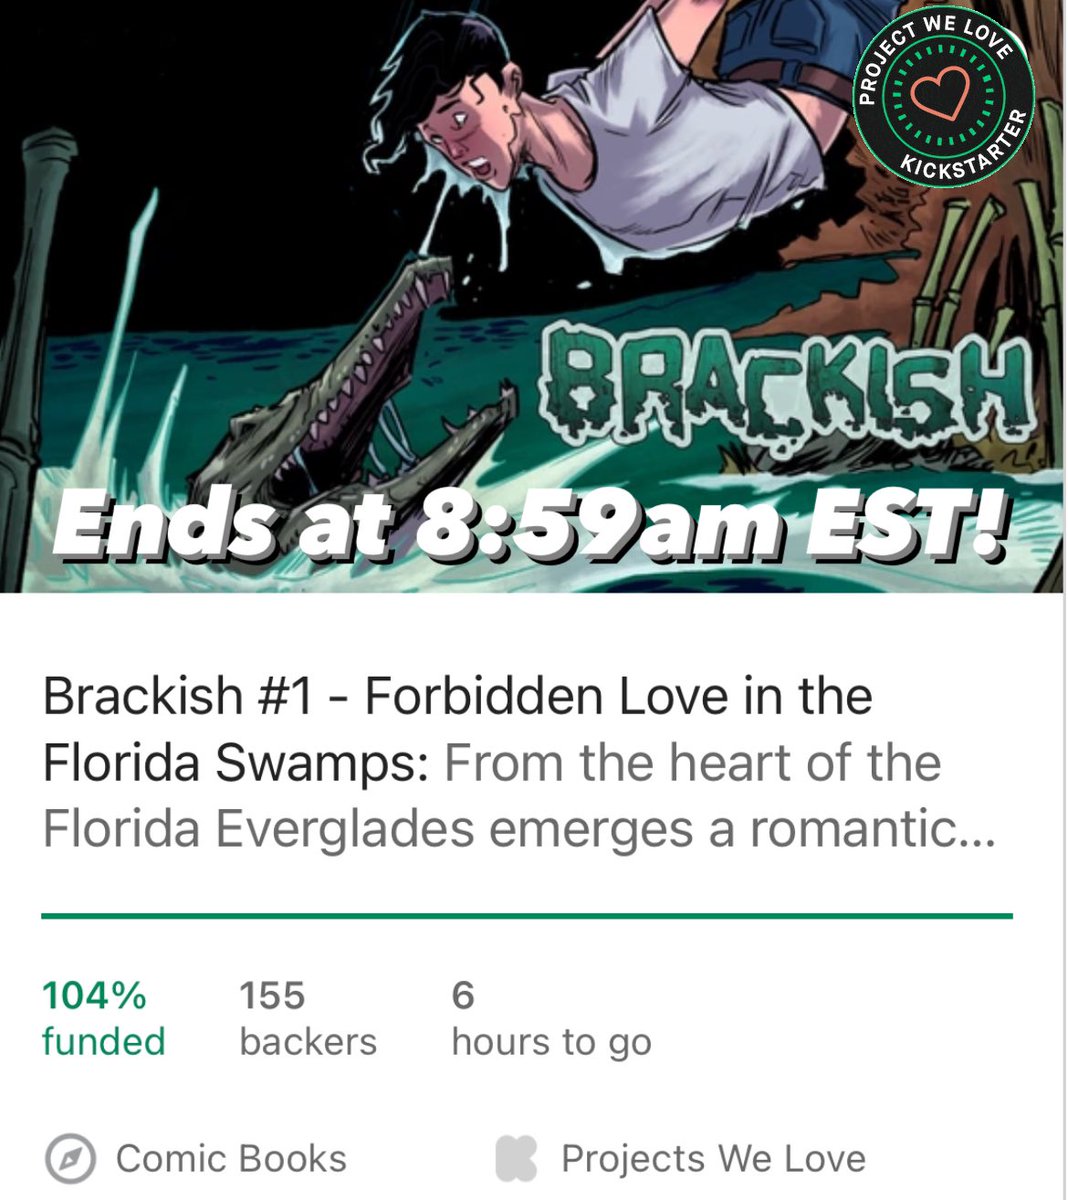 If you’re seeing this before 8:59am EST, please help us reach at least one stretch goal before the campaign ends! Link to support BRACKISH #1 in the thread. #KickstarterReads #ProjectWeLove